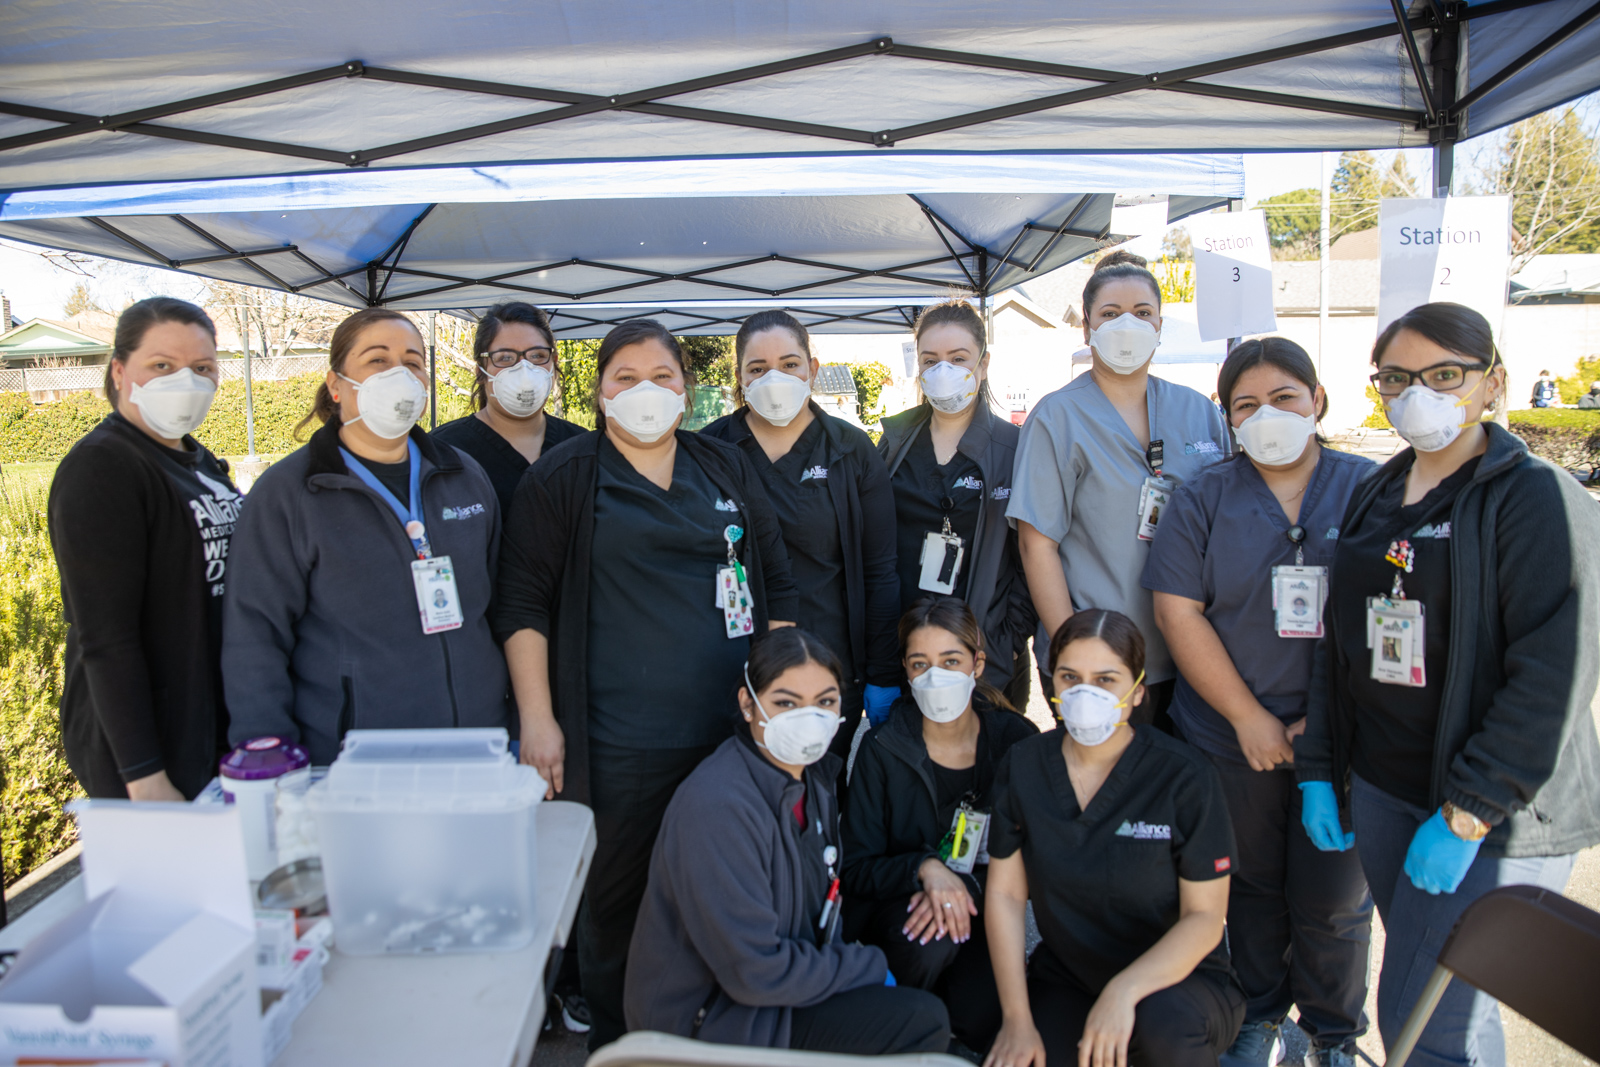 A group of Alliance Medical Center workers prepped and ready for action.